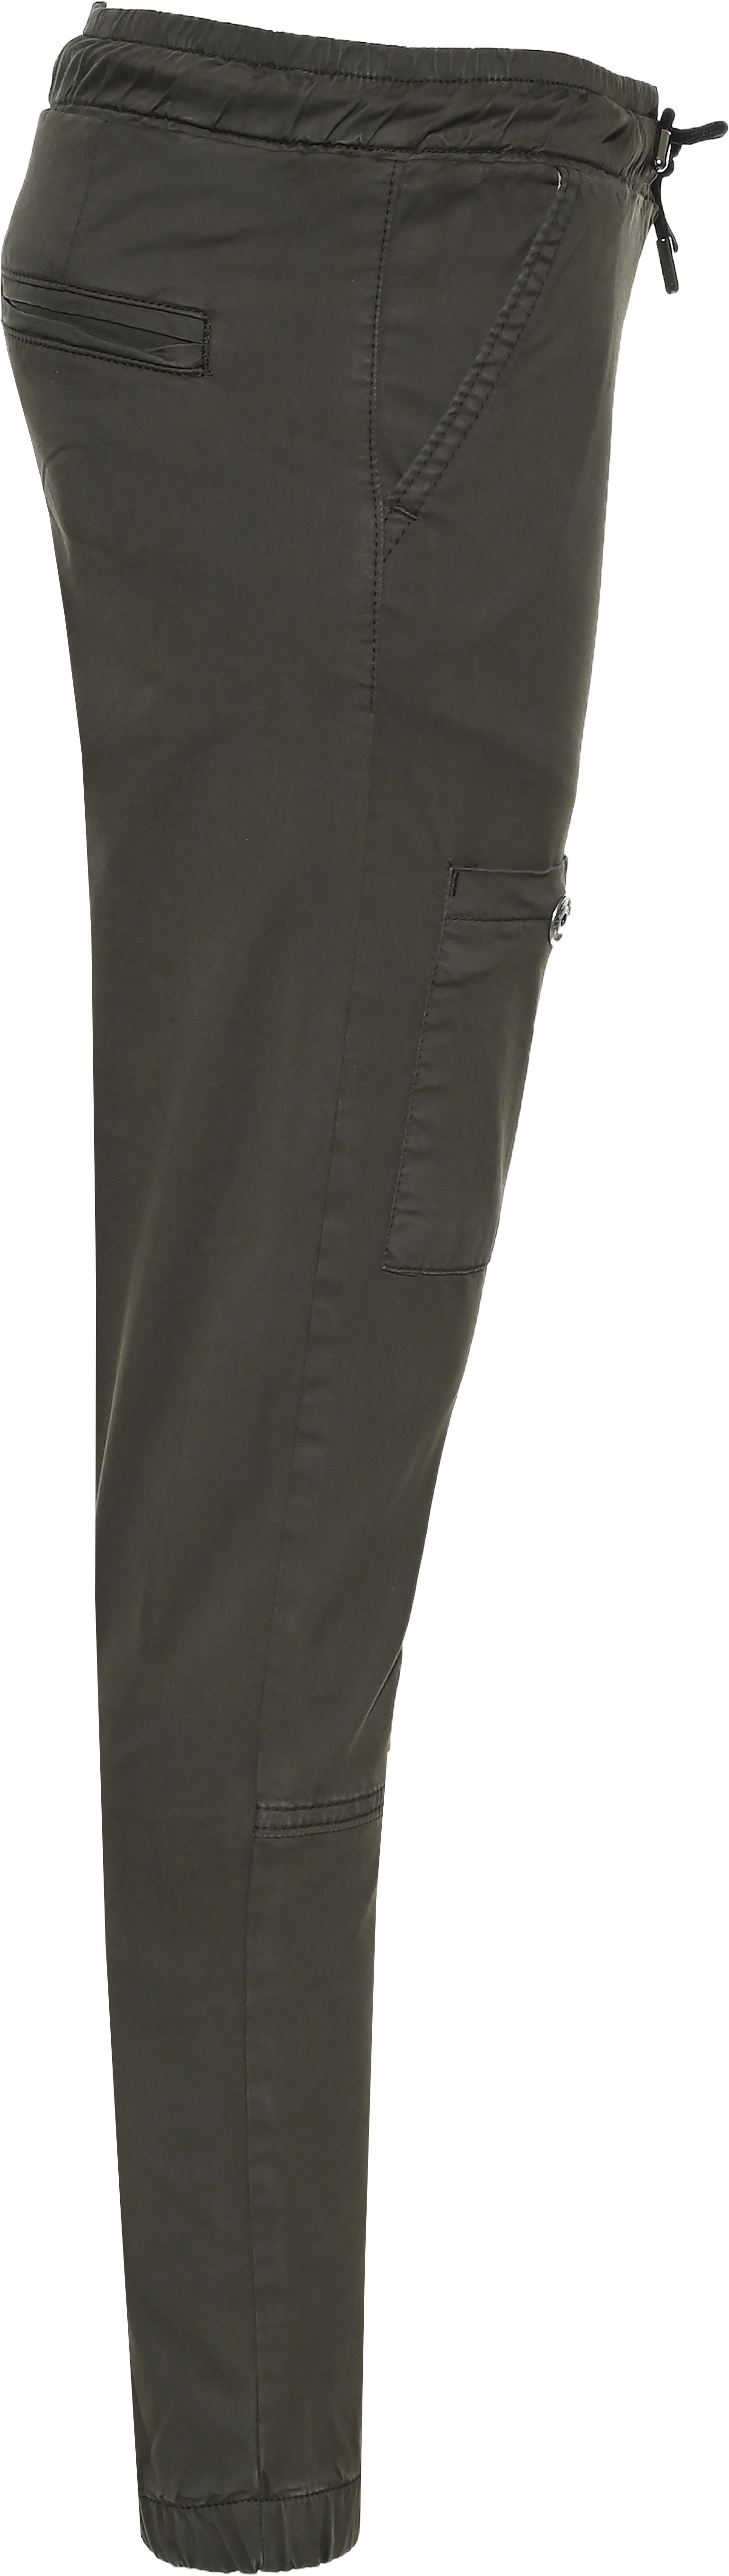 2823-Boys Utility Jogg-Pant  available in Slim,Normal